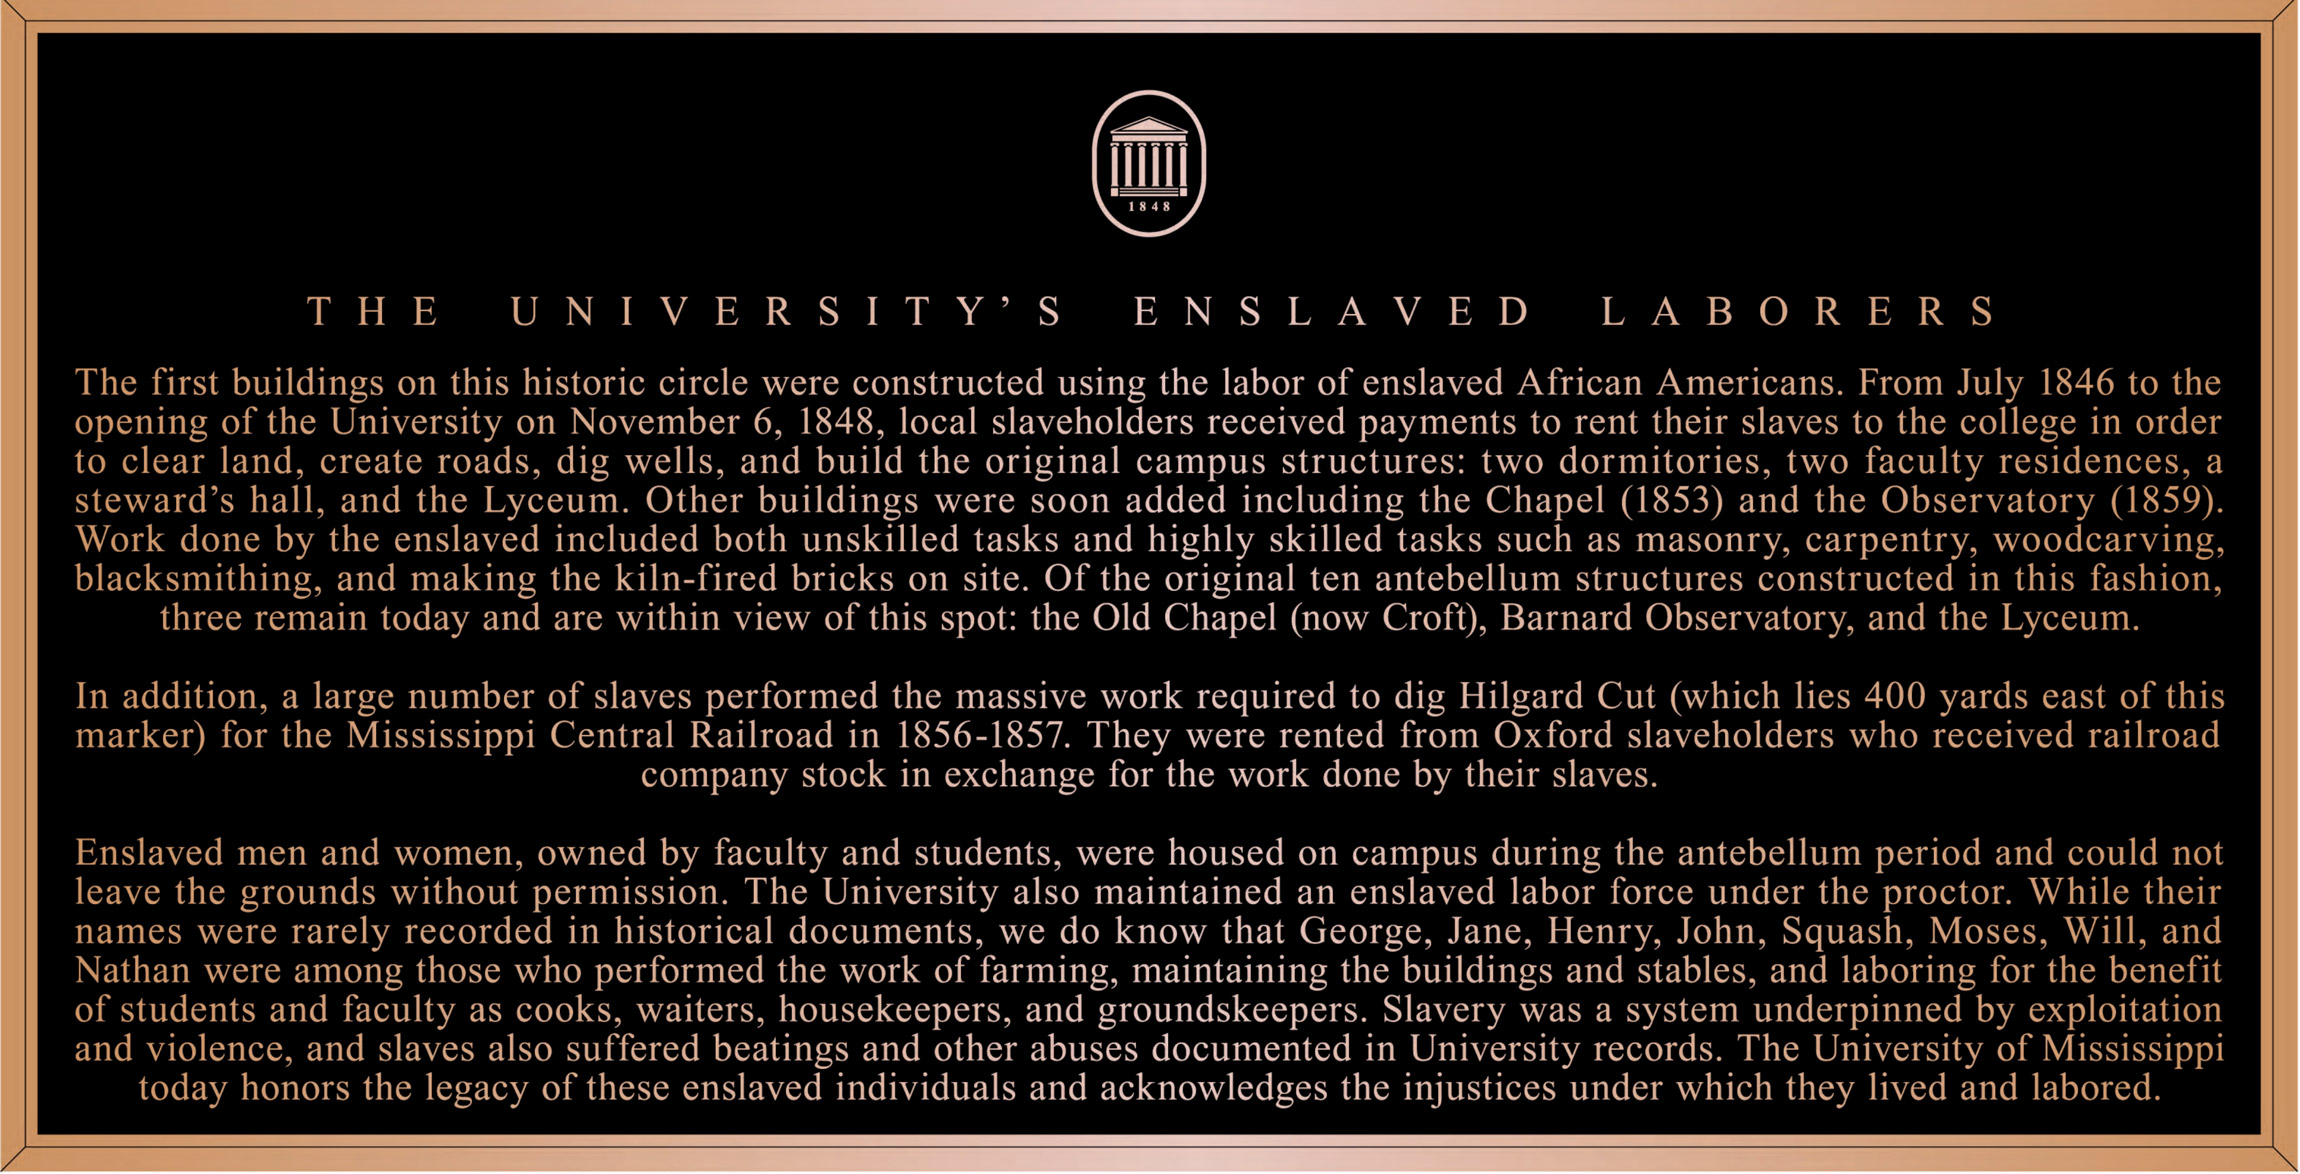 The University’s Enslaved Laborers